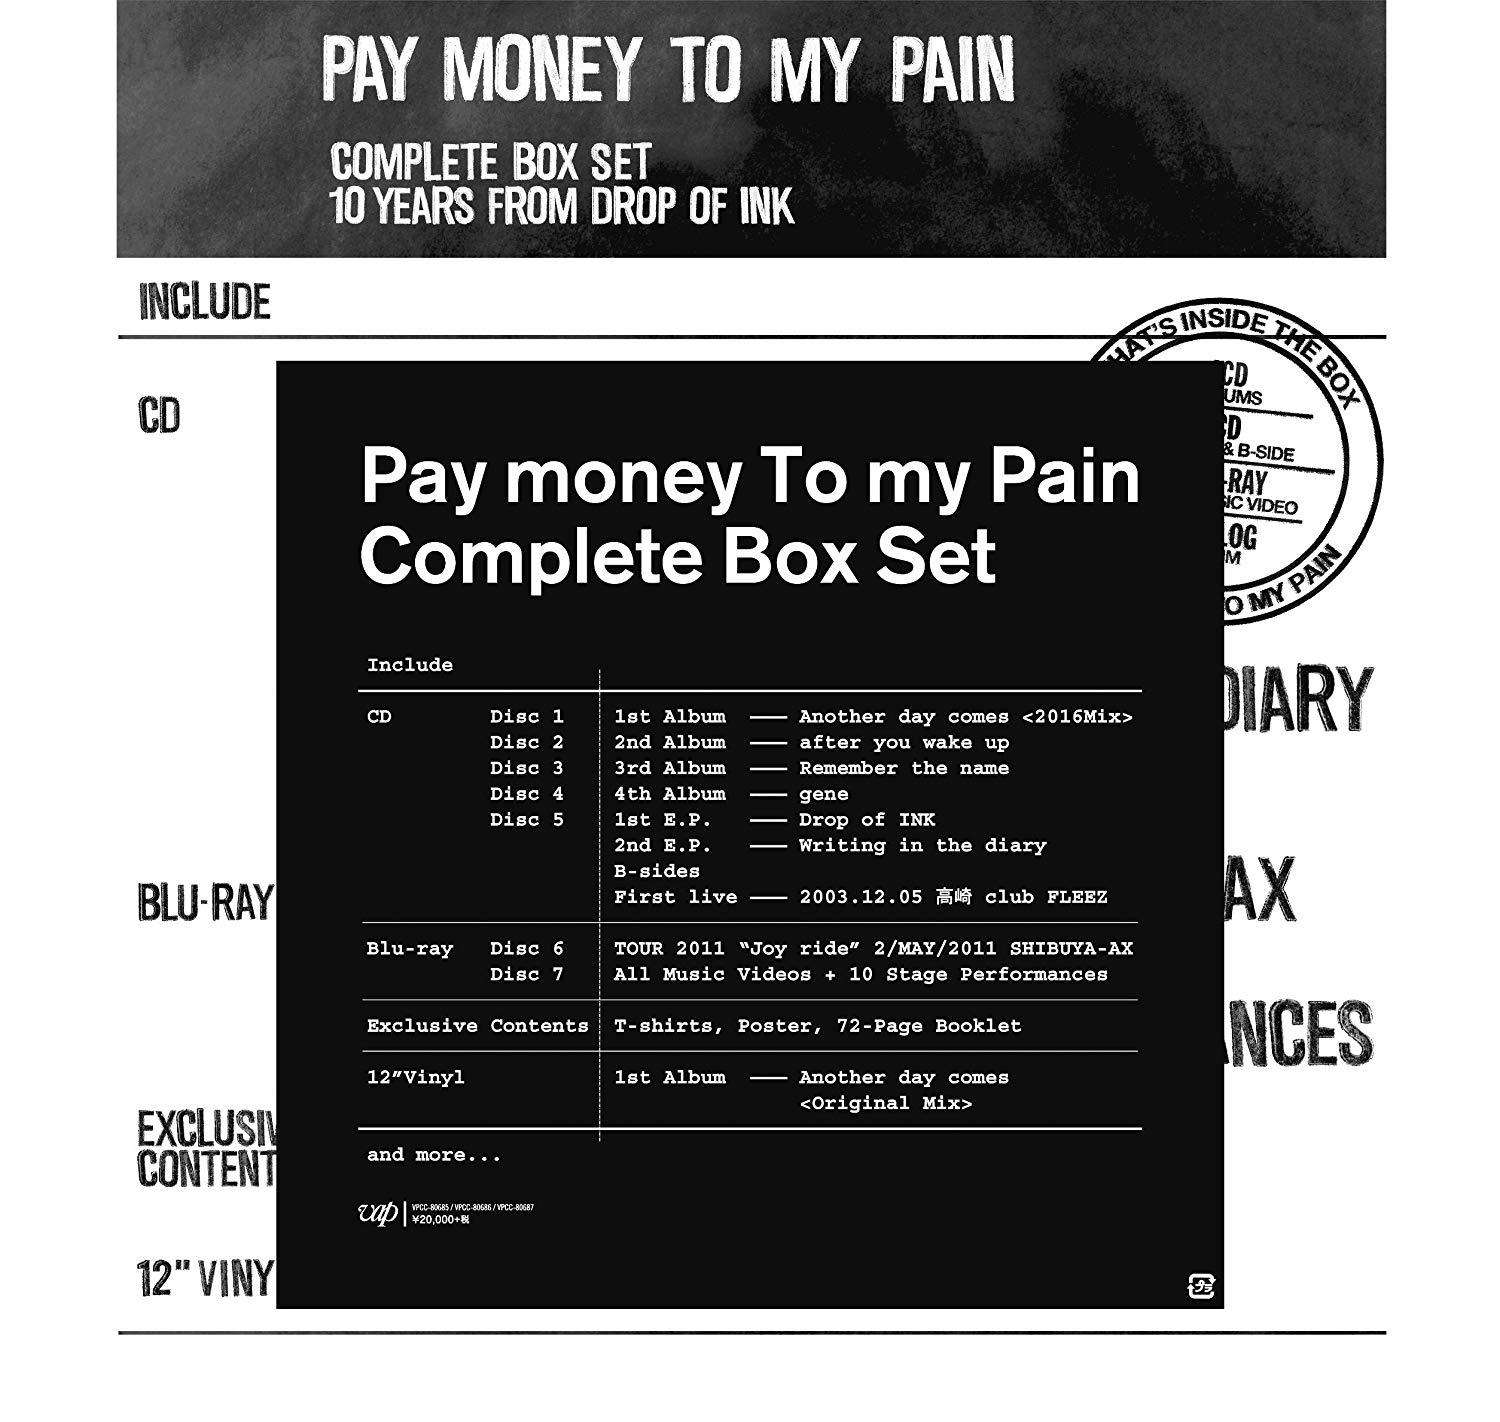 Pay money To my Pain -L-(Y) Pay money To my Pain obv